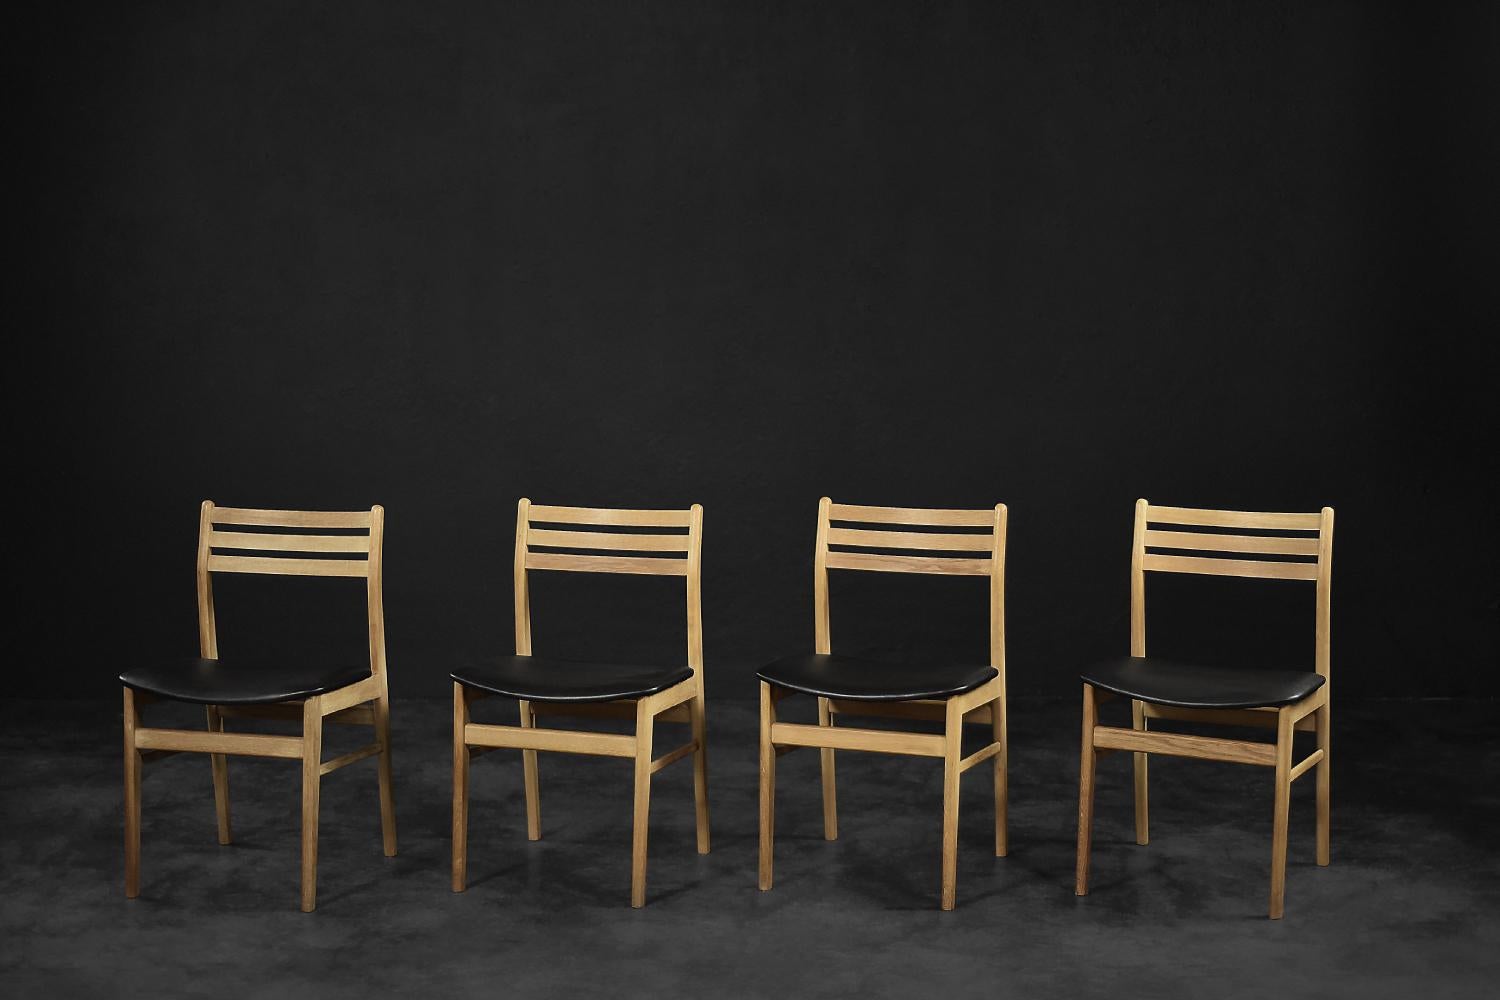 This set of four dining chairs was produced during the 1960s by the Danish manufactory Sax Mobelfabrik. The chairs are made of oak wood in a natural, warm and sunny shade. The wood has a calm and regular grain. The backrest is made of three flat